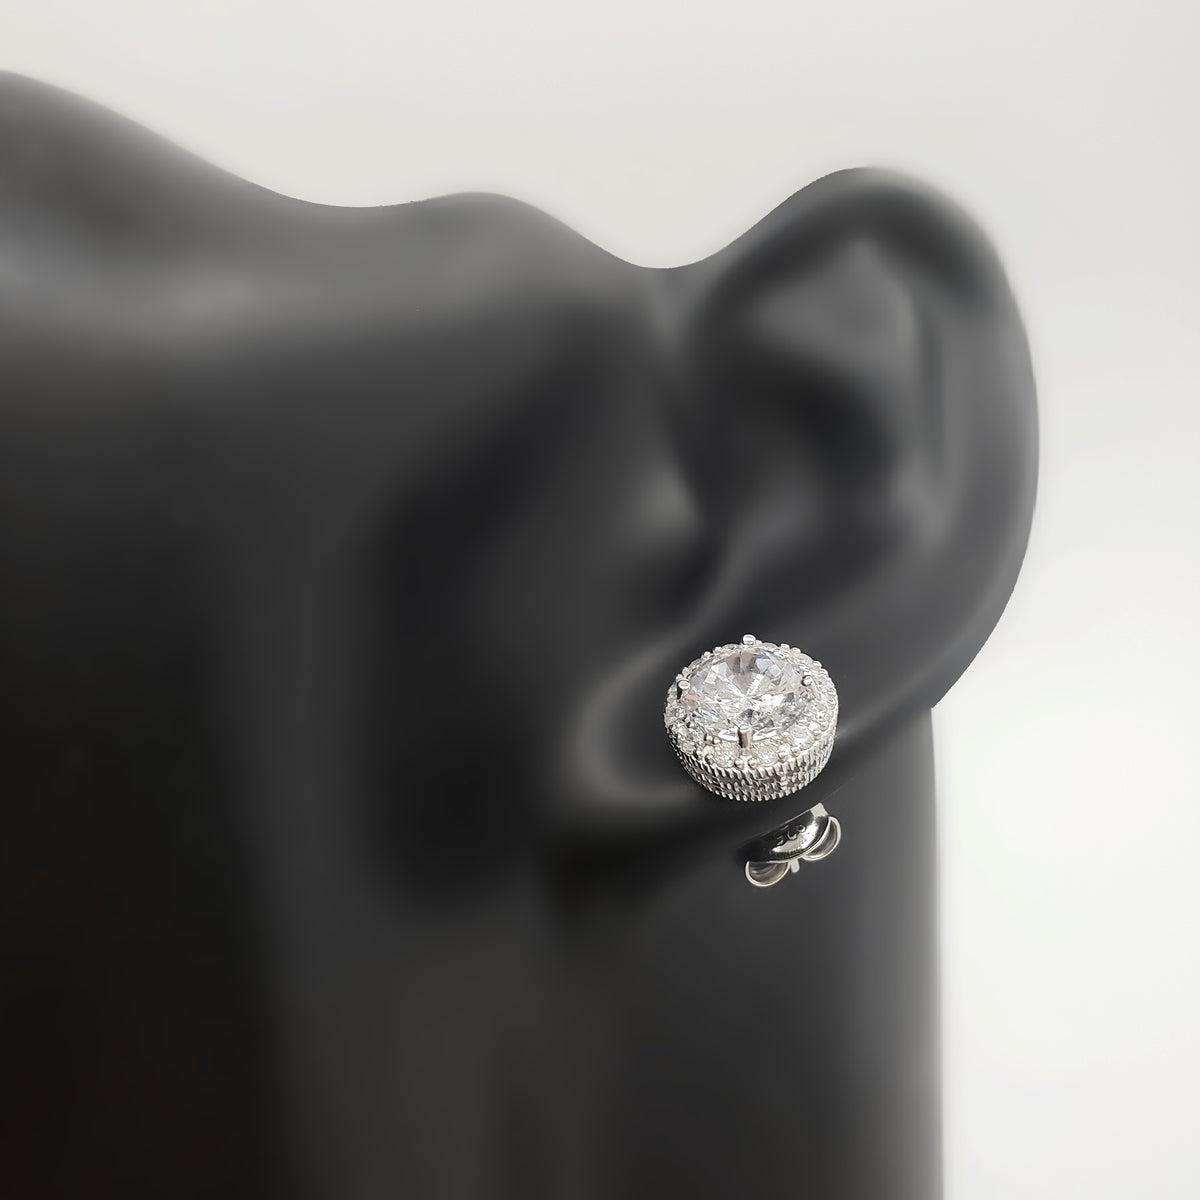 925 Sterling Silver 7mm Cubic Zirconia with Halo Studs - 10mm